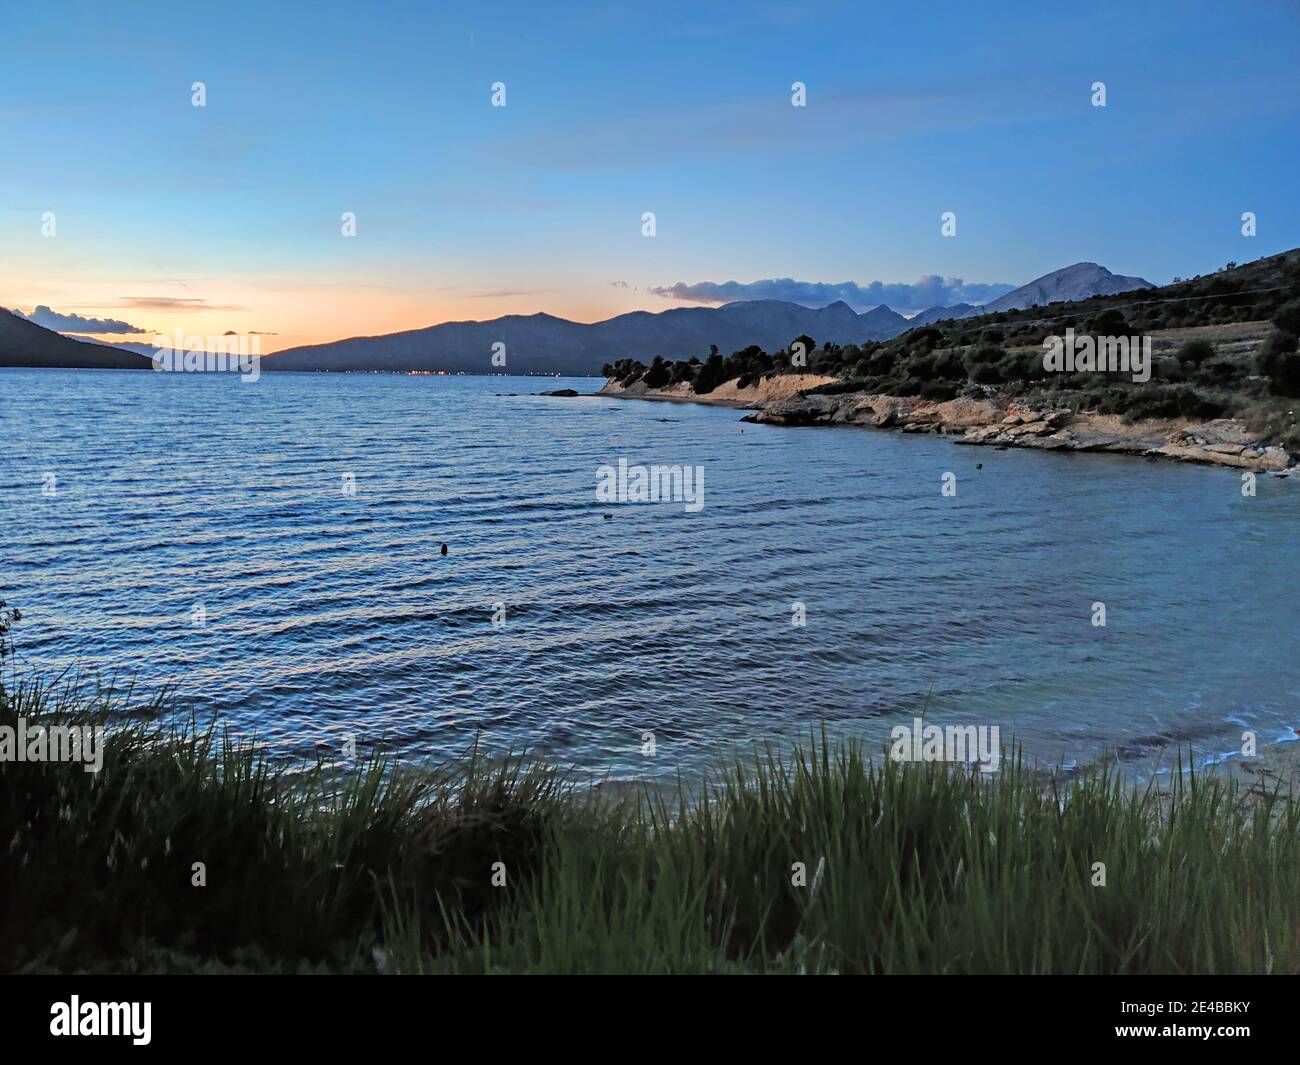 Bay on the mainland in the sound of Kalamos island, Ionian Sea, central Greece Stock Photo